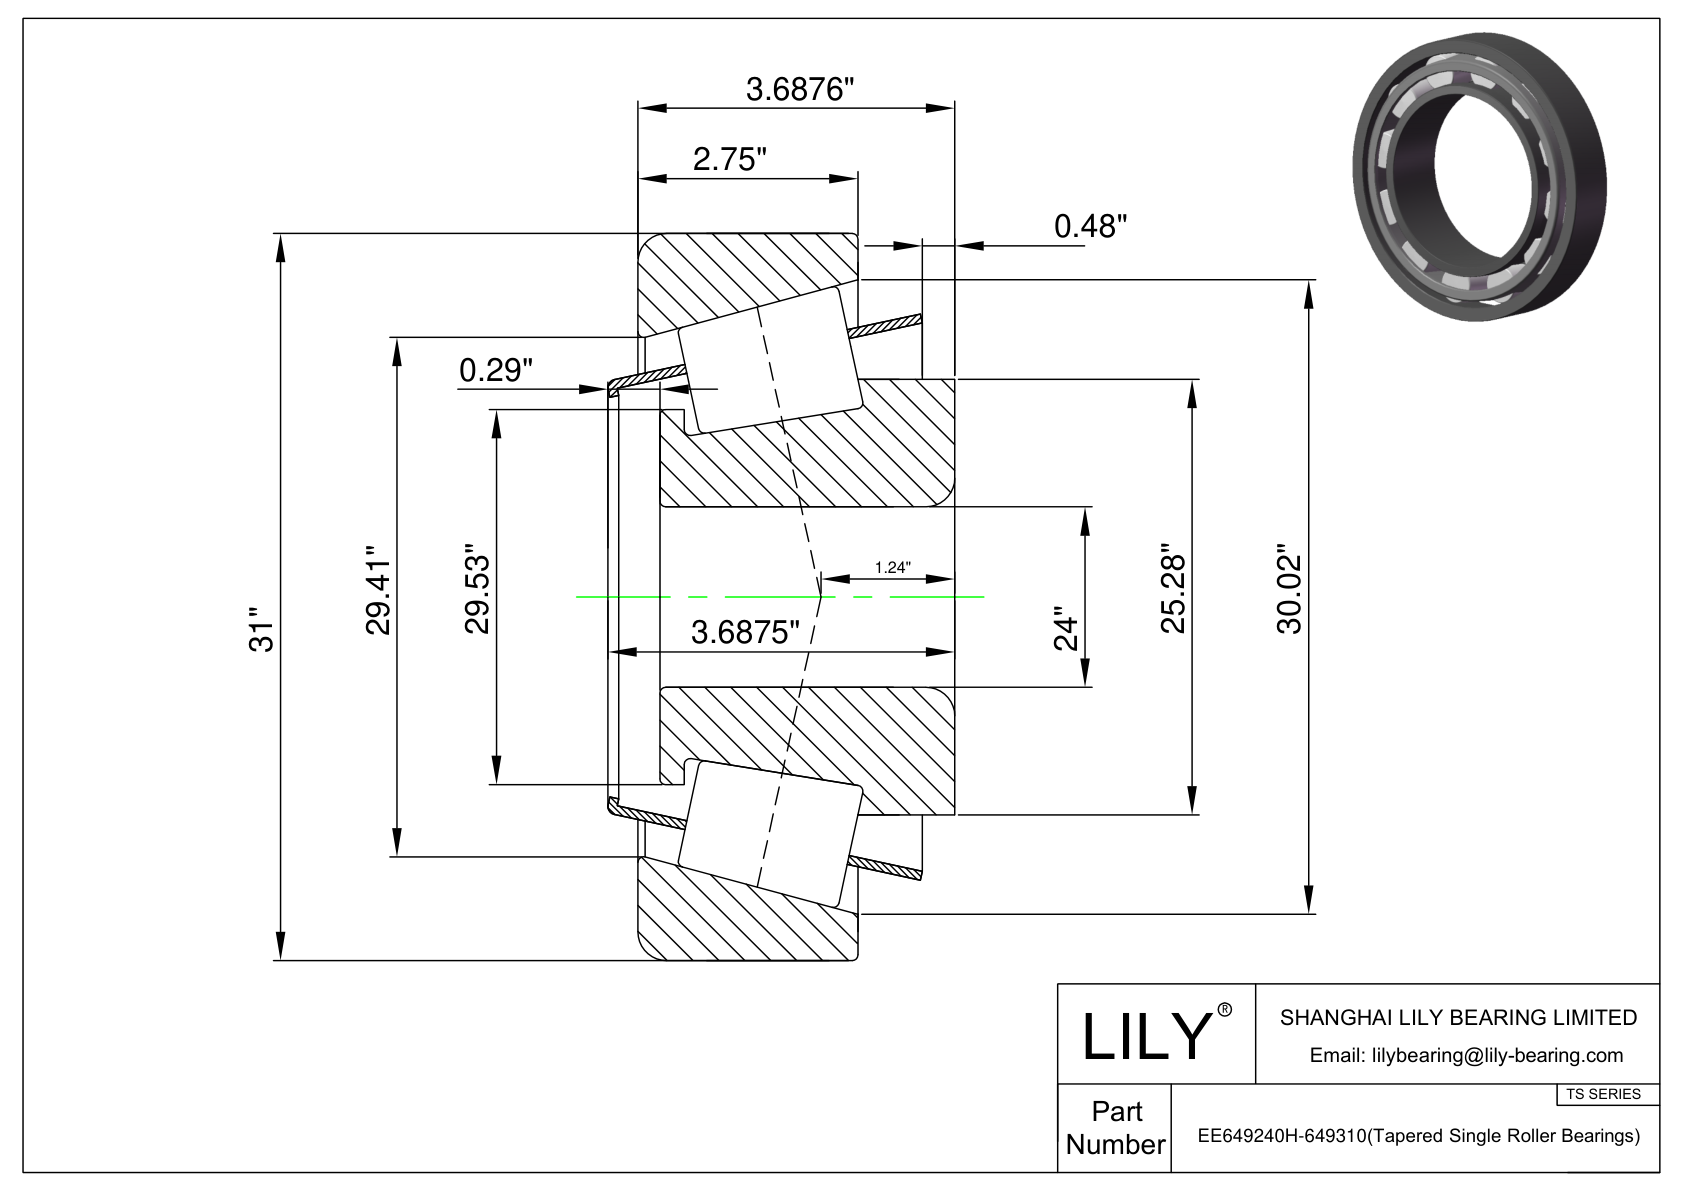 EE649240H-649310 TS (Tapered Single Roller Bearings) (Imperial) cad drawing